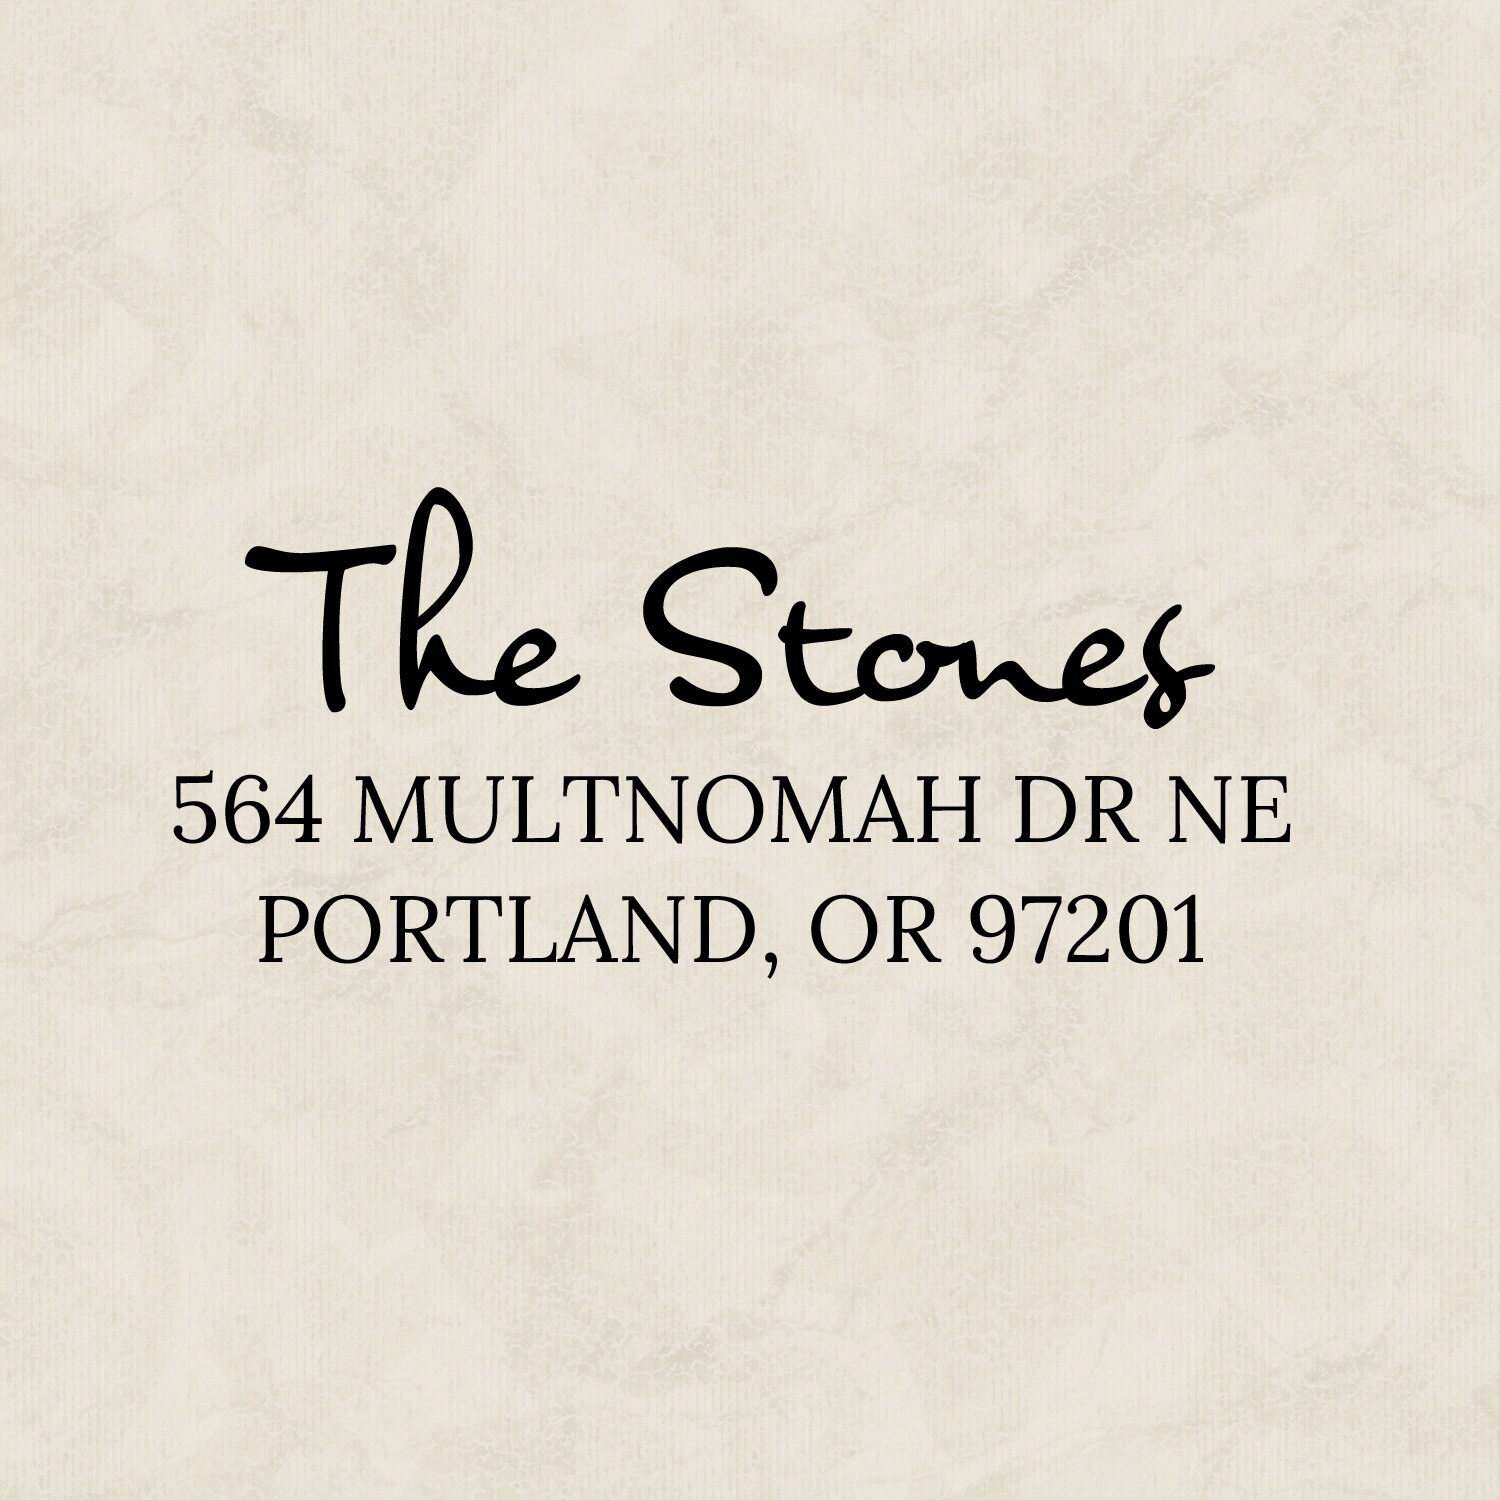 Pre-Inked Rubber Address Stamp, Customized For Your Envelopes, Or A Housewarming Gift